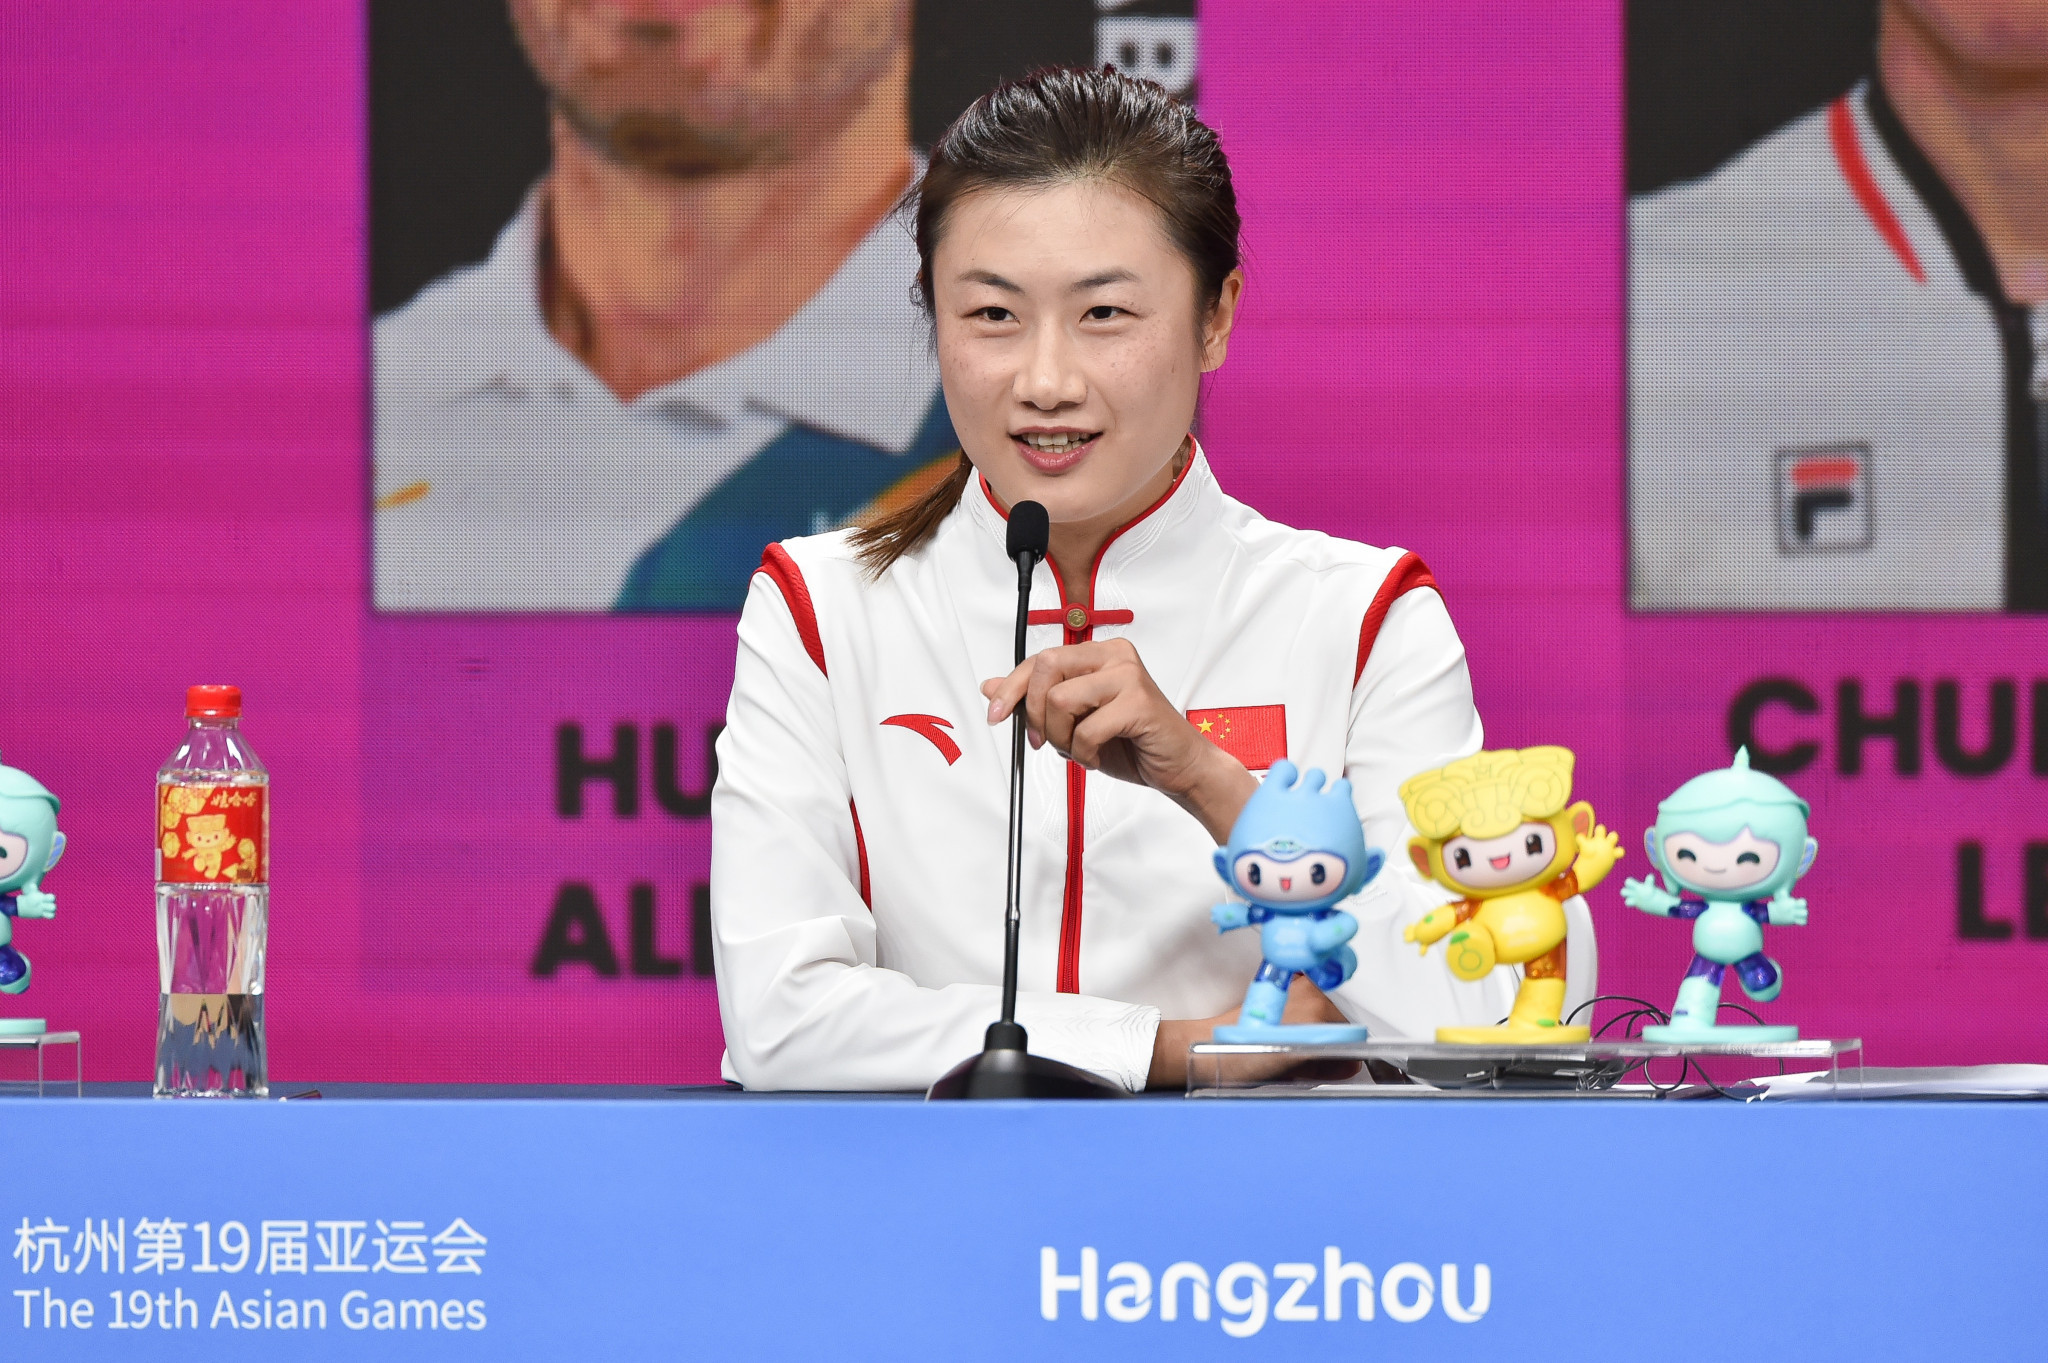 Three-time Olympic table tennis gold medallist Ding Ning of China has been elected on to the OCA Athletes' Committee ©Hangzhou 2022